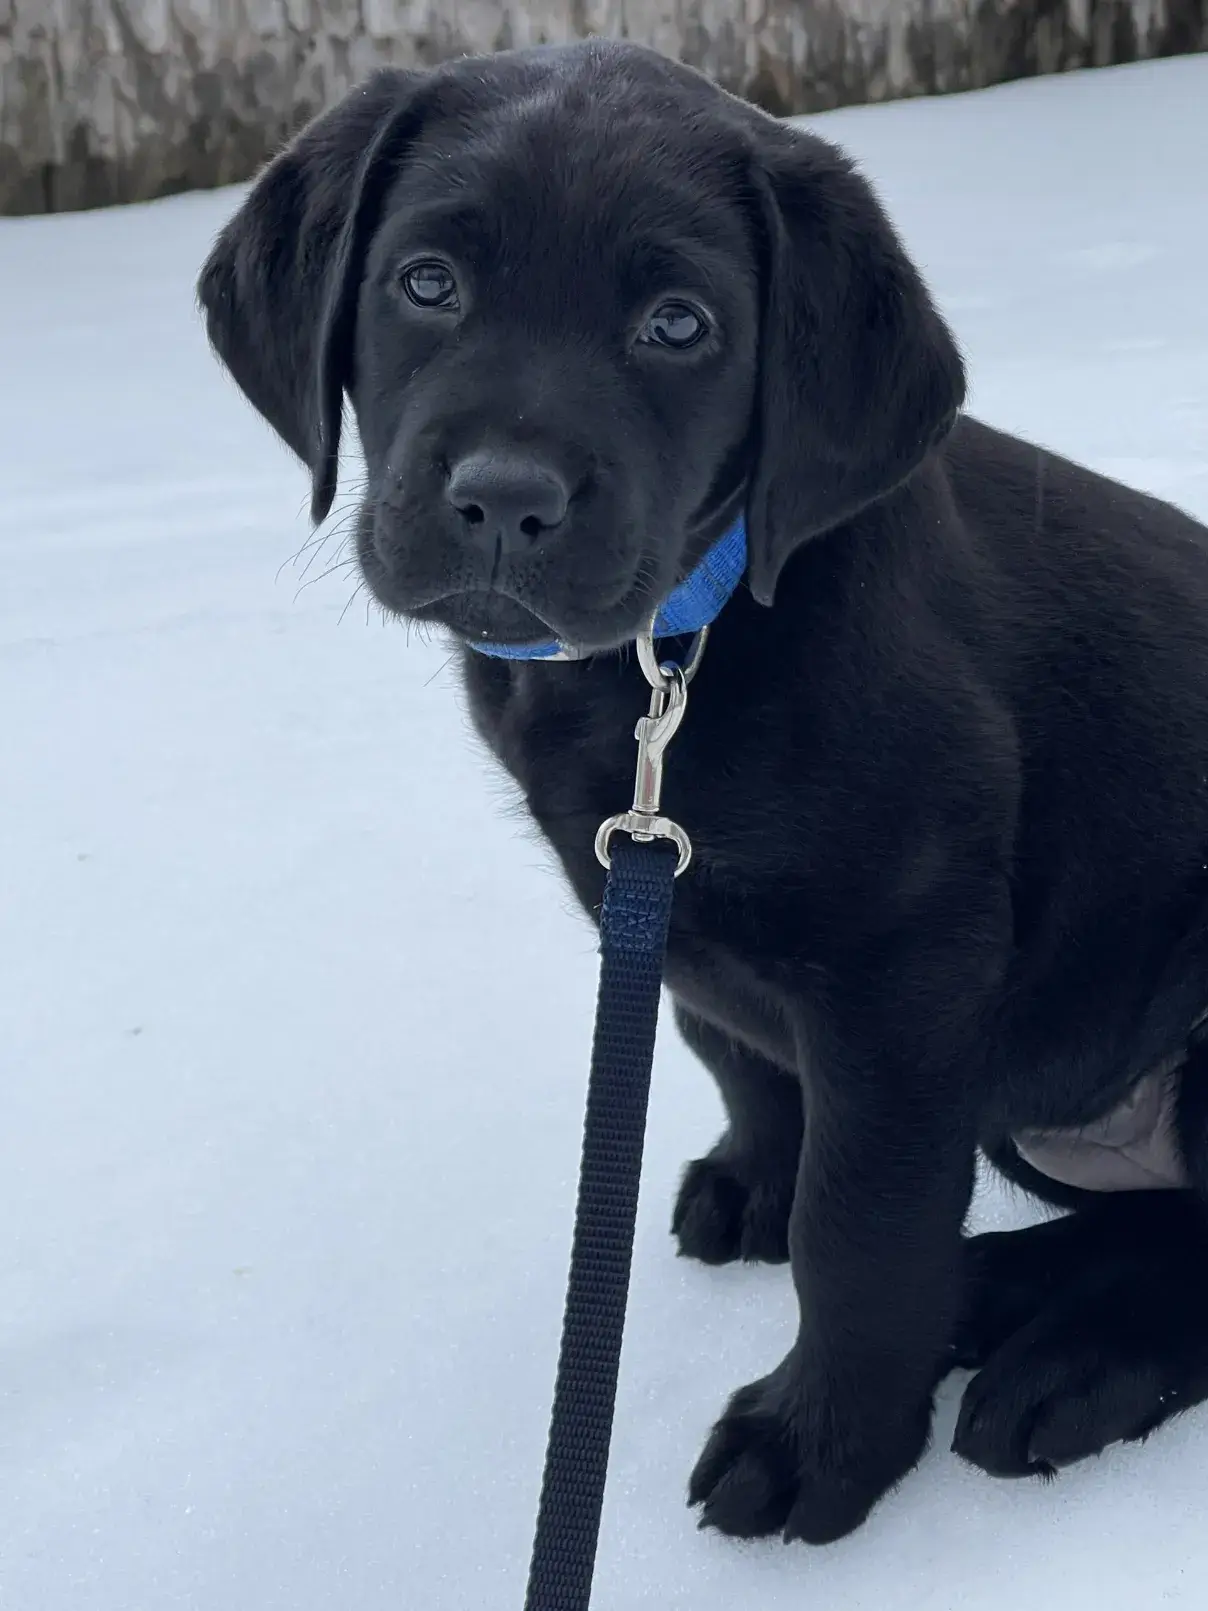 Sophie, a black lab puppy, sits in the snow and looks toward the camera with a thoughtful expression.